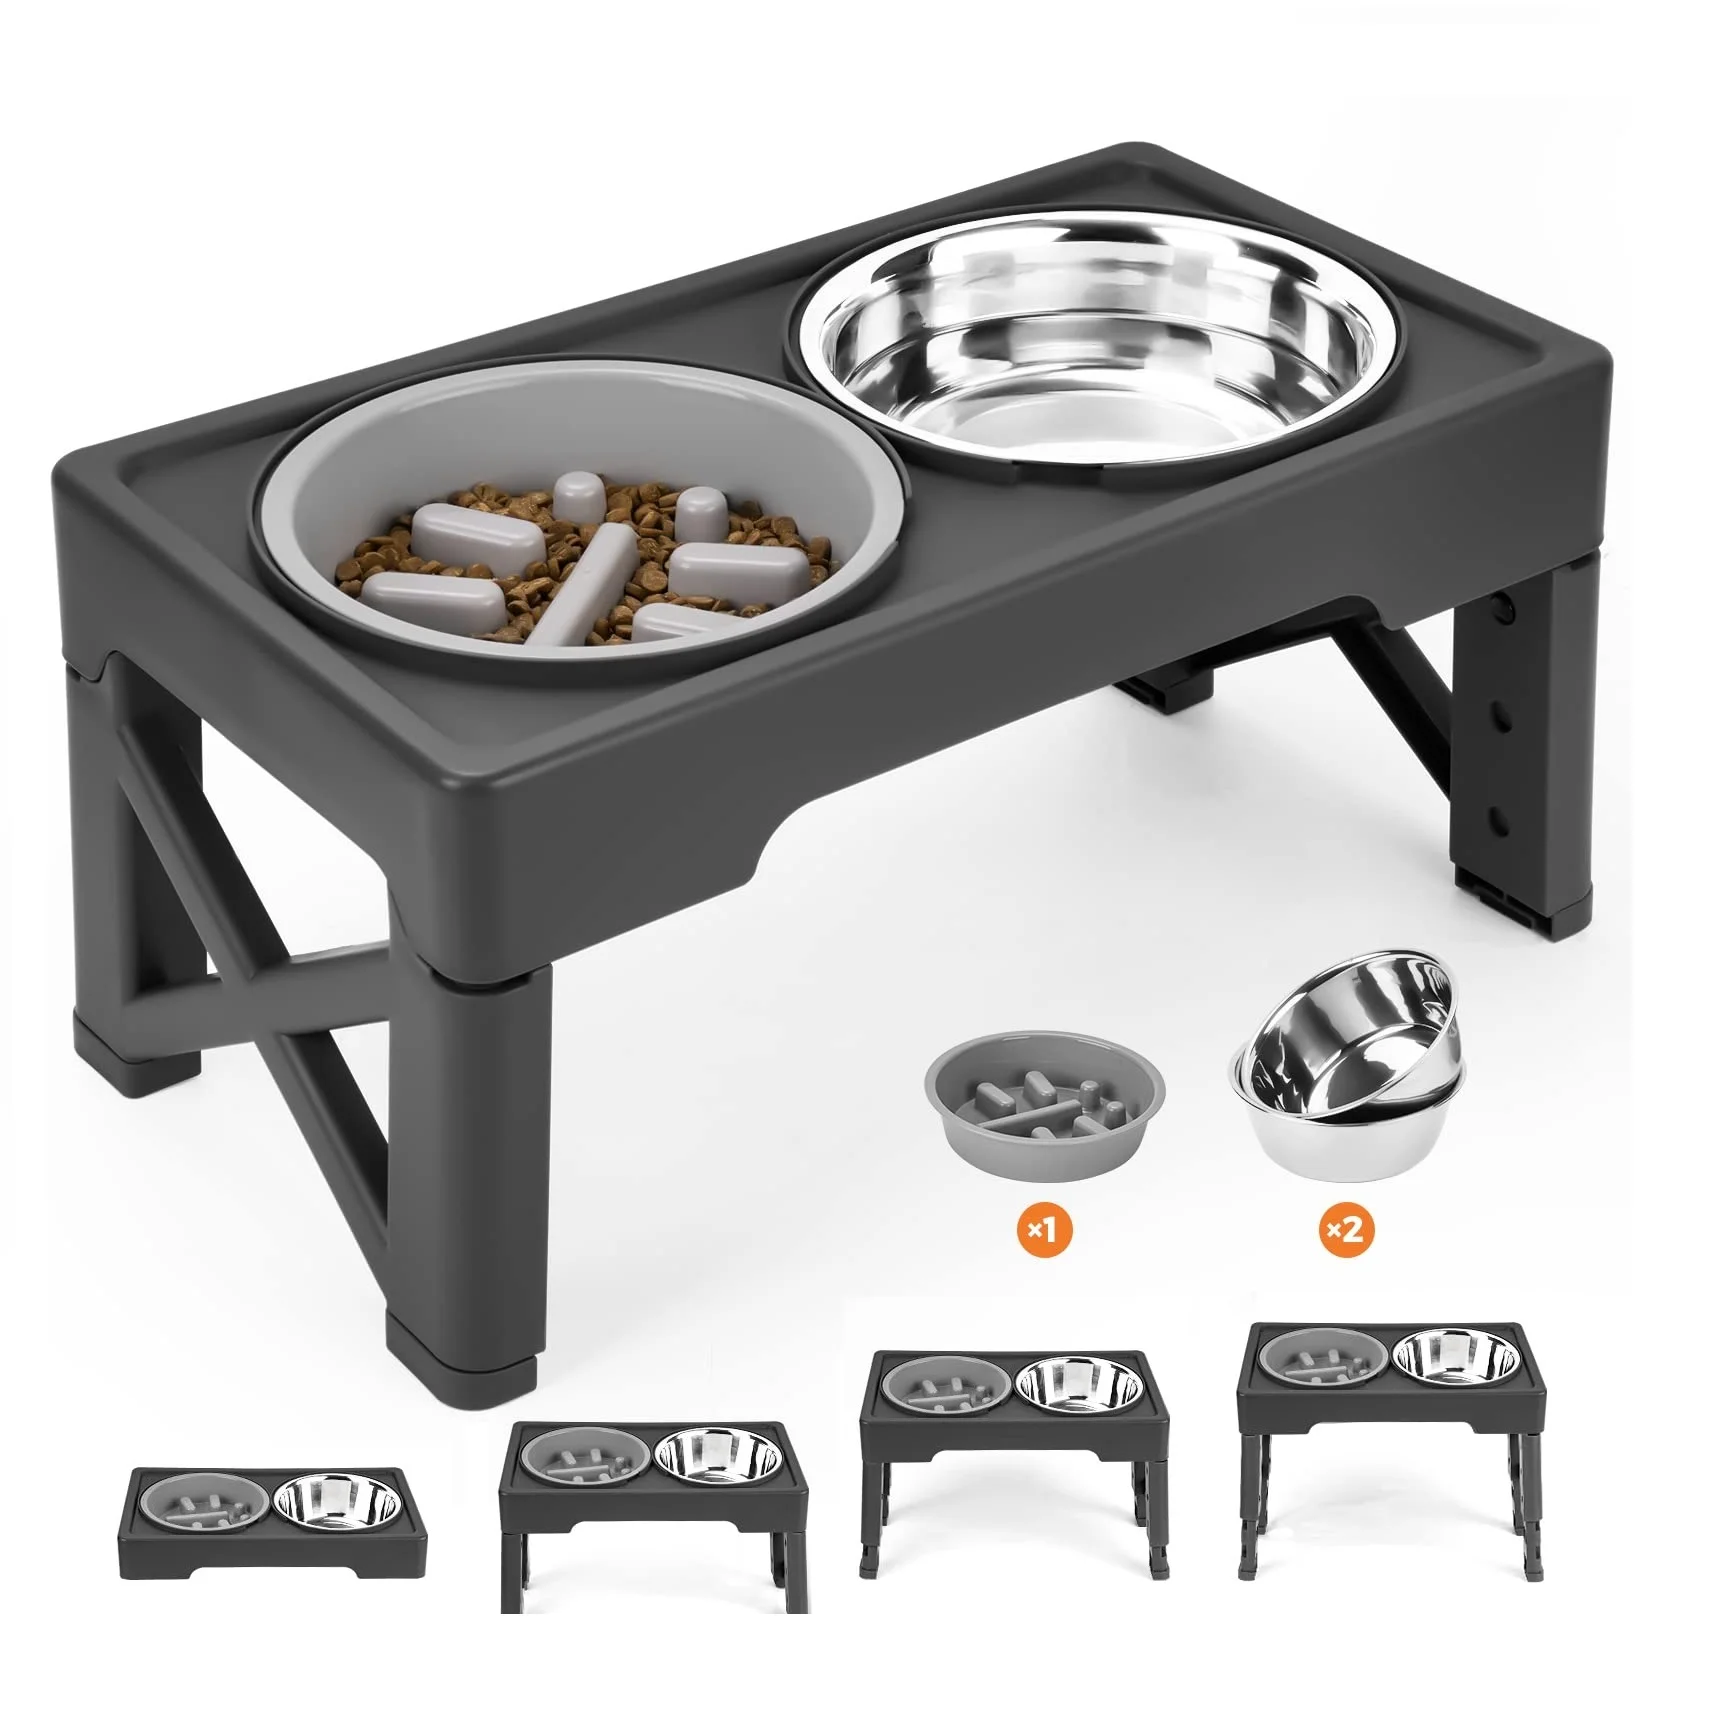 

Elevated Dog Bowls 4 Adjustable Heights Raised Stand with Slow Feeder Bowl 2 Stainless Steel Food & Water Bowls